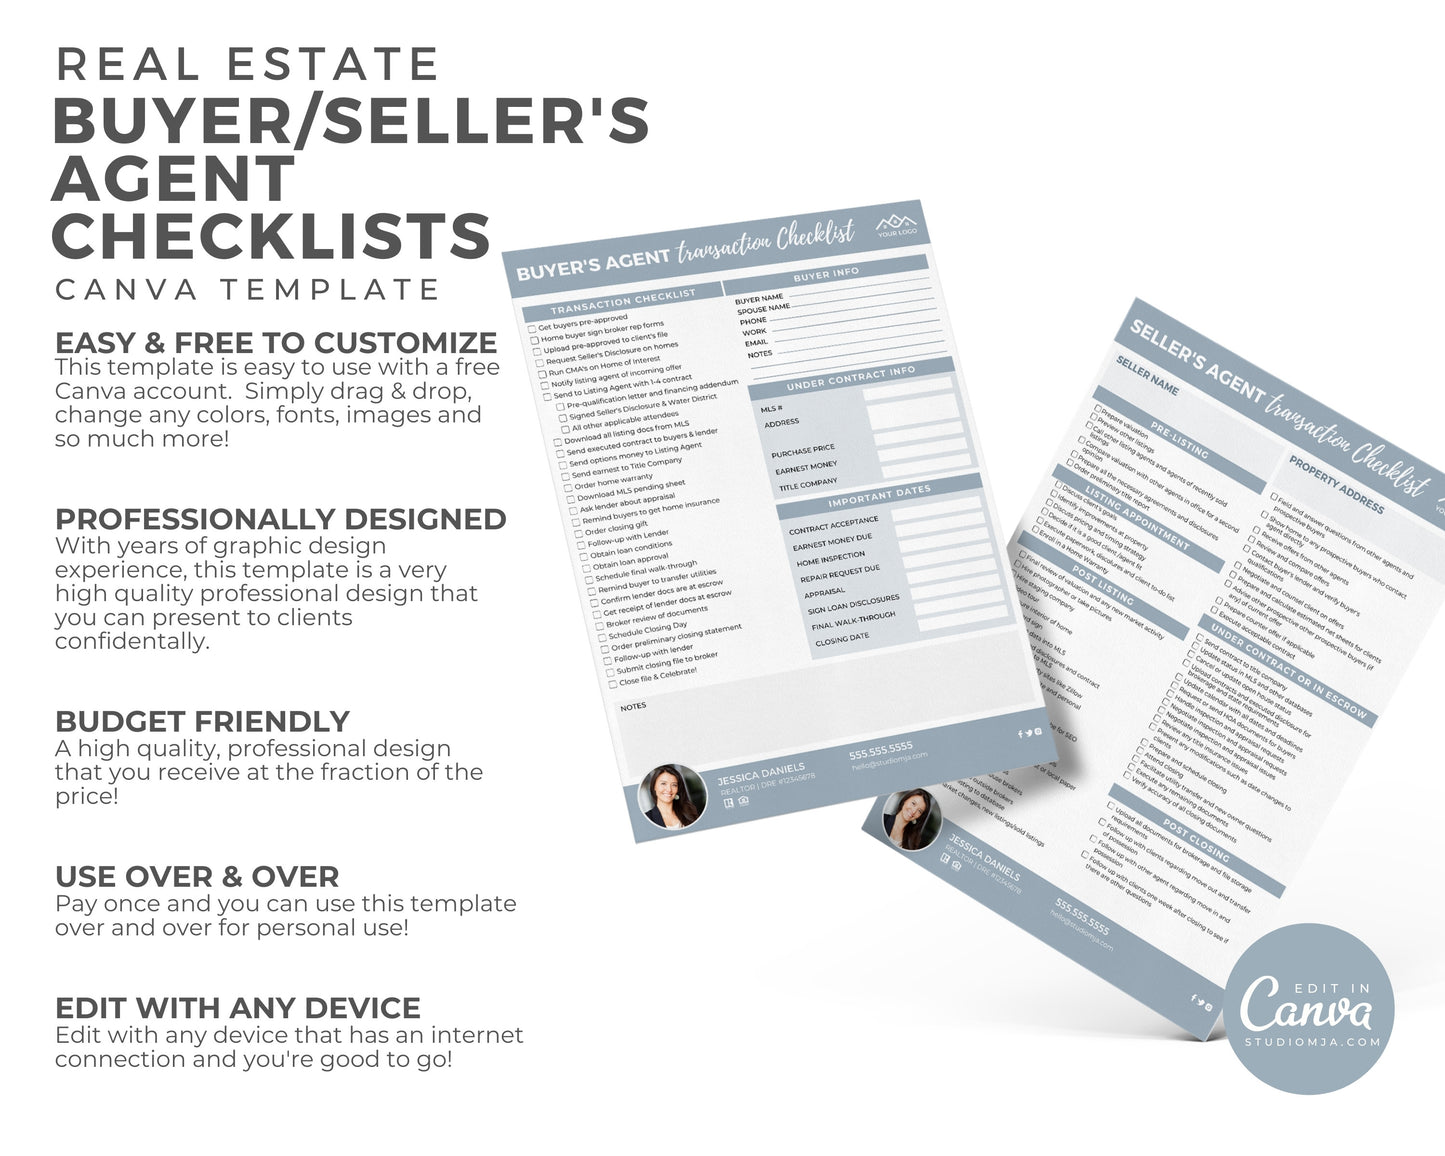 Real Estate Seller and Buyer Agent Transaction Checklist